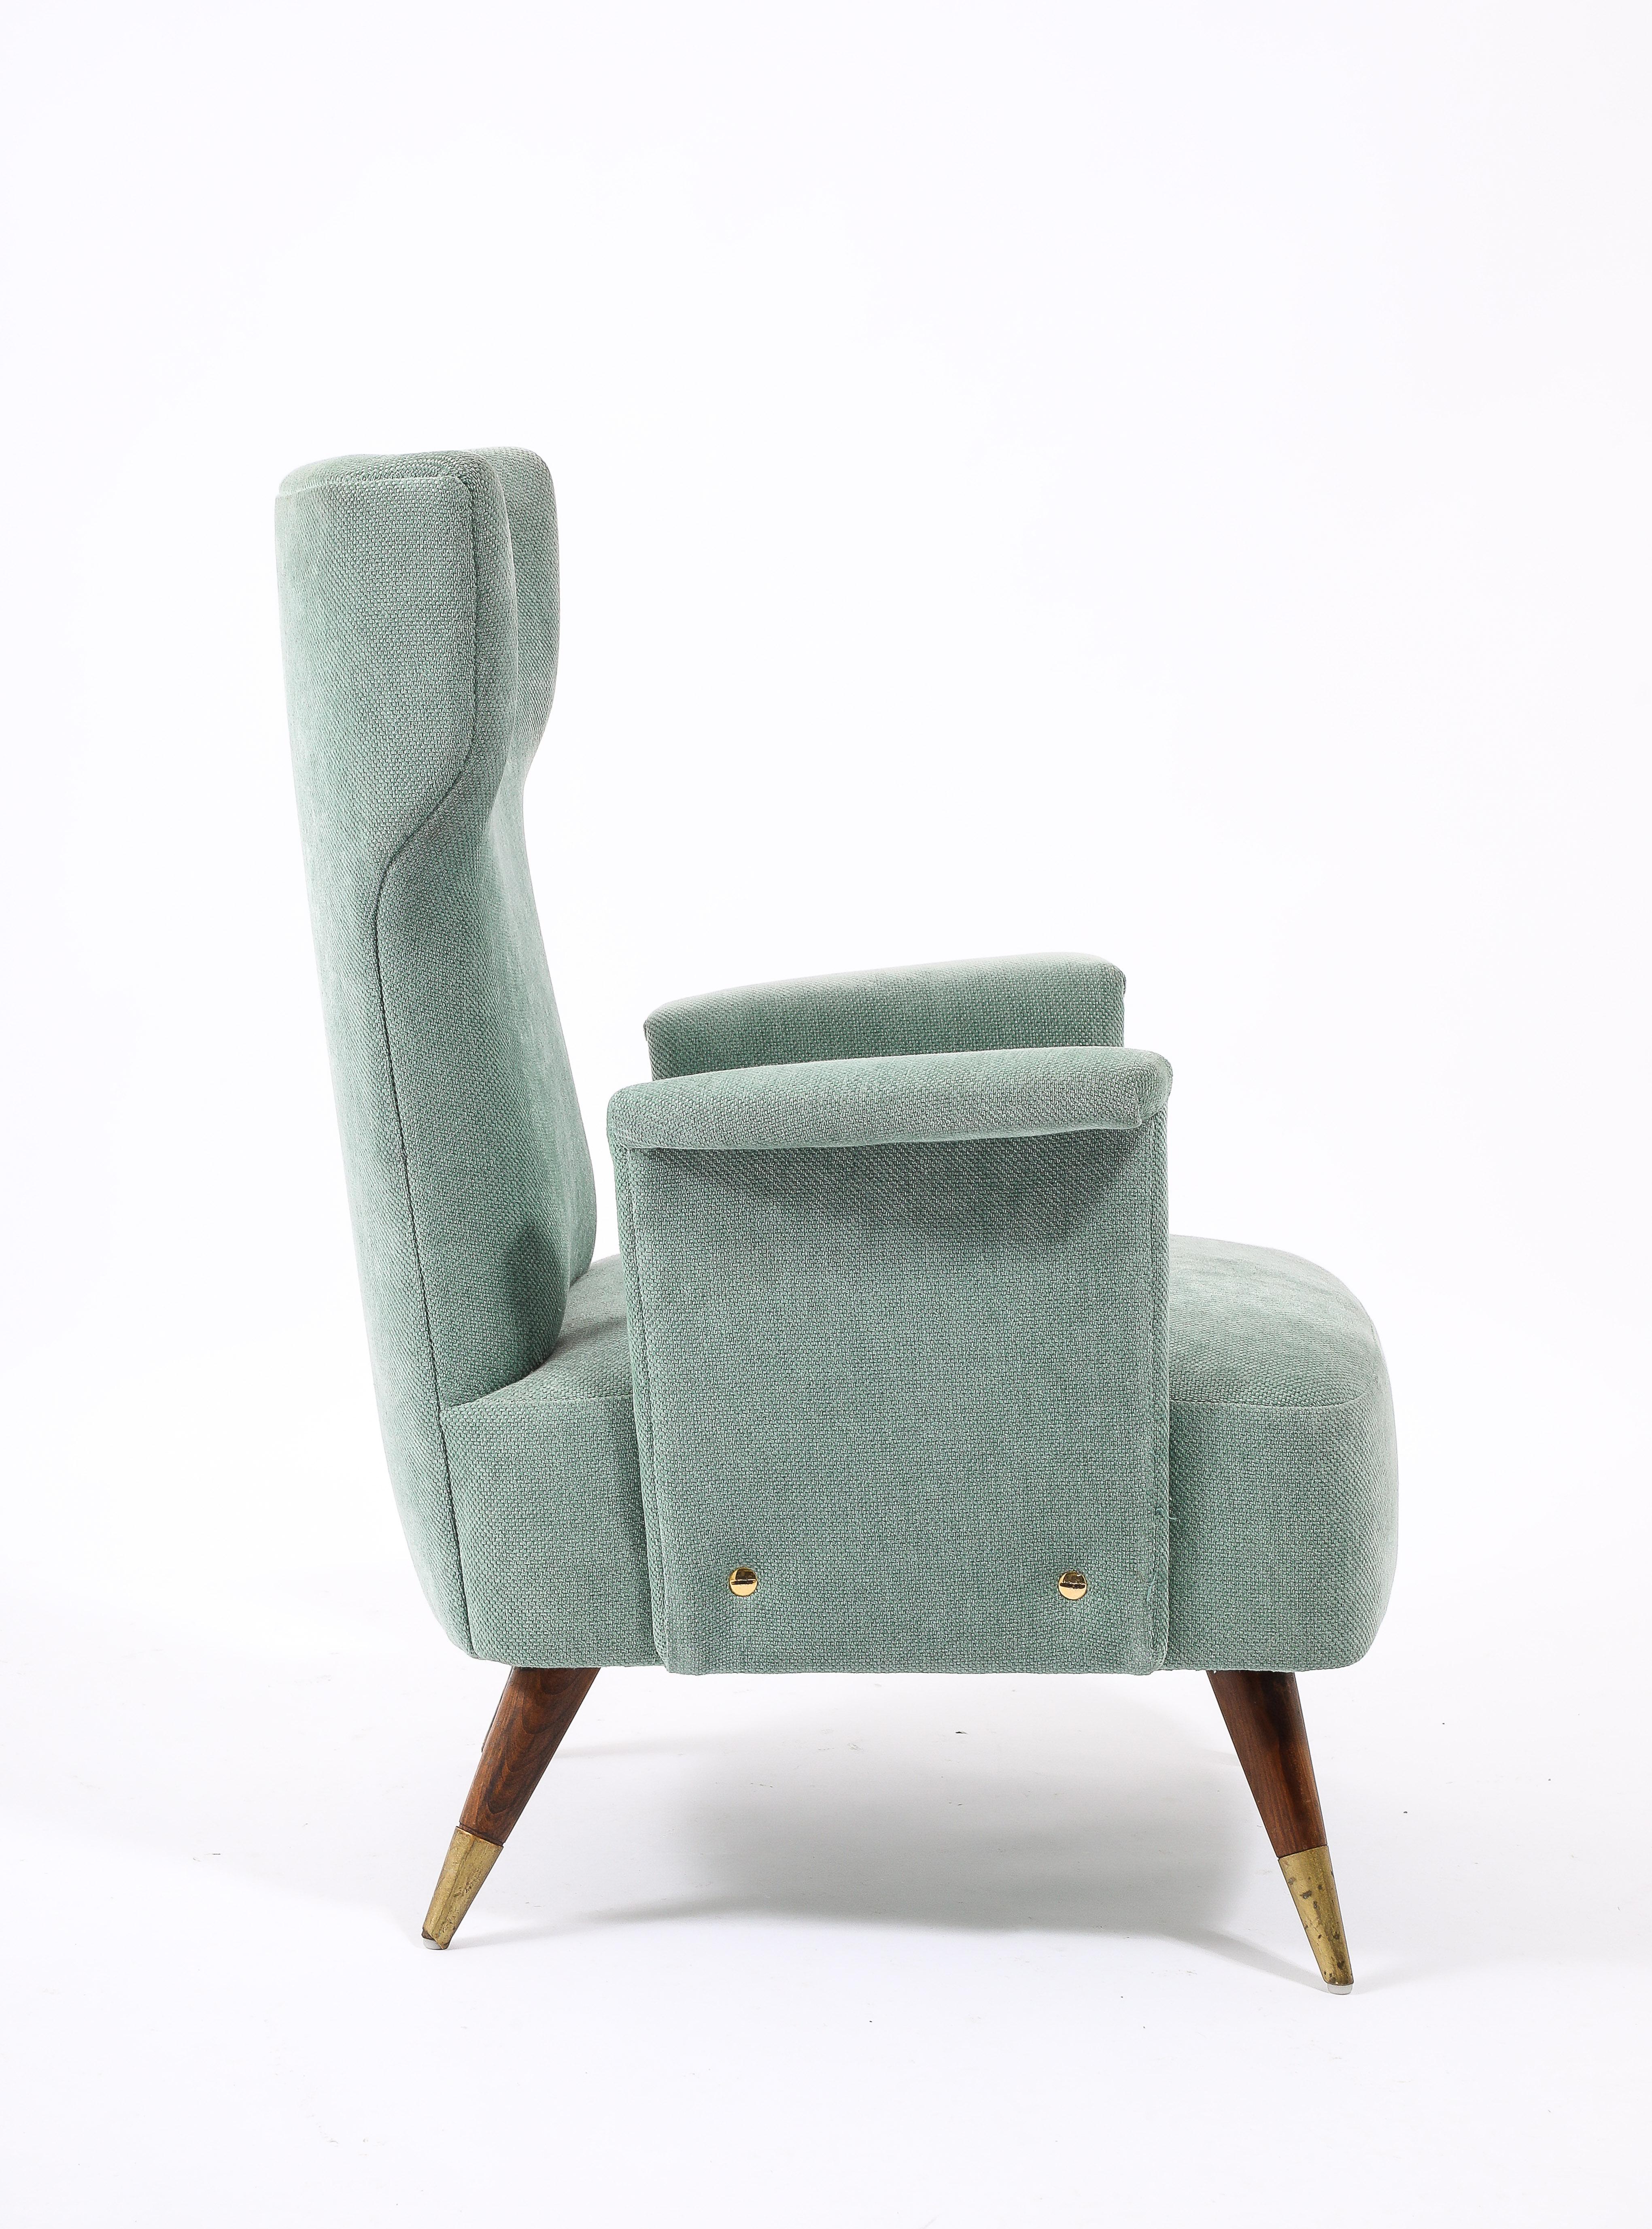 Pair of light blue cotton upholstered armchairs in the style of Paolo Buffa on cherry legs with brass accents.
